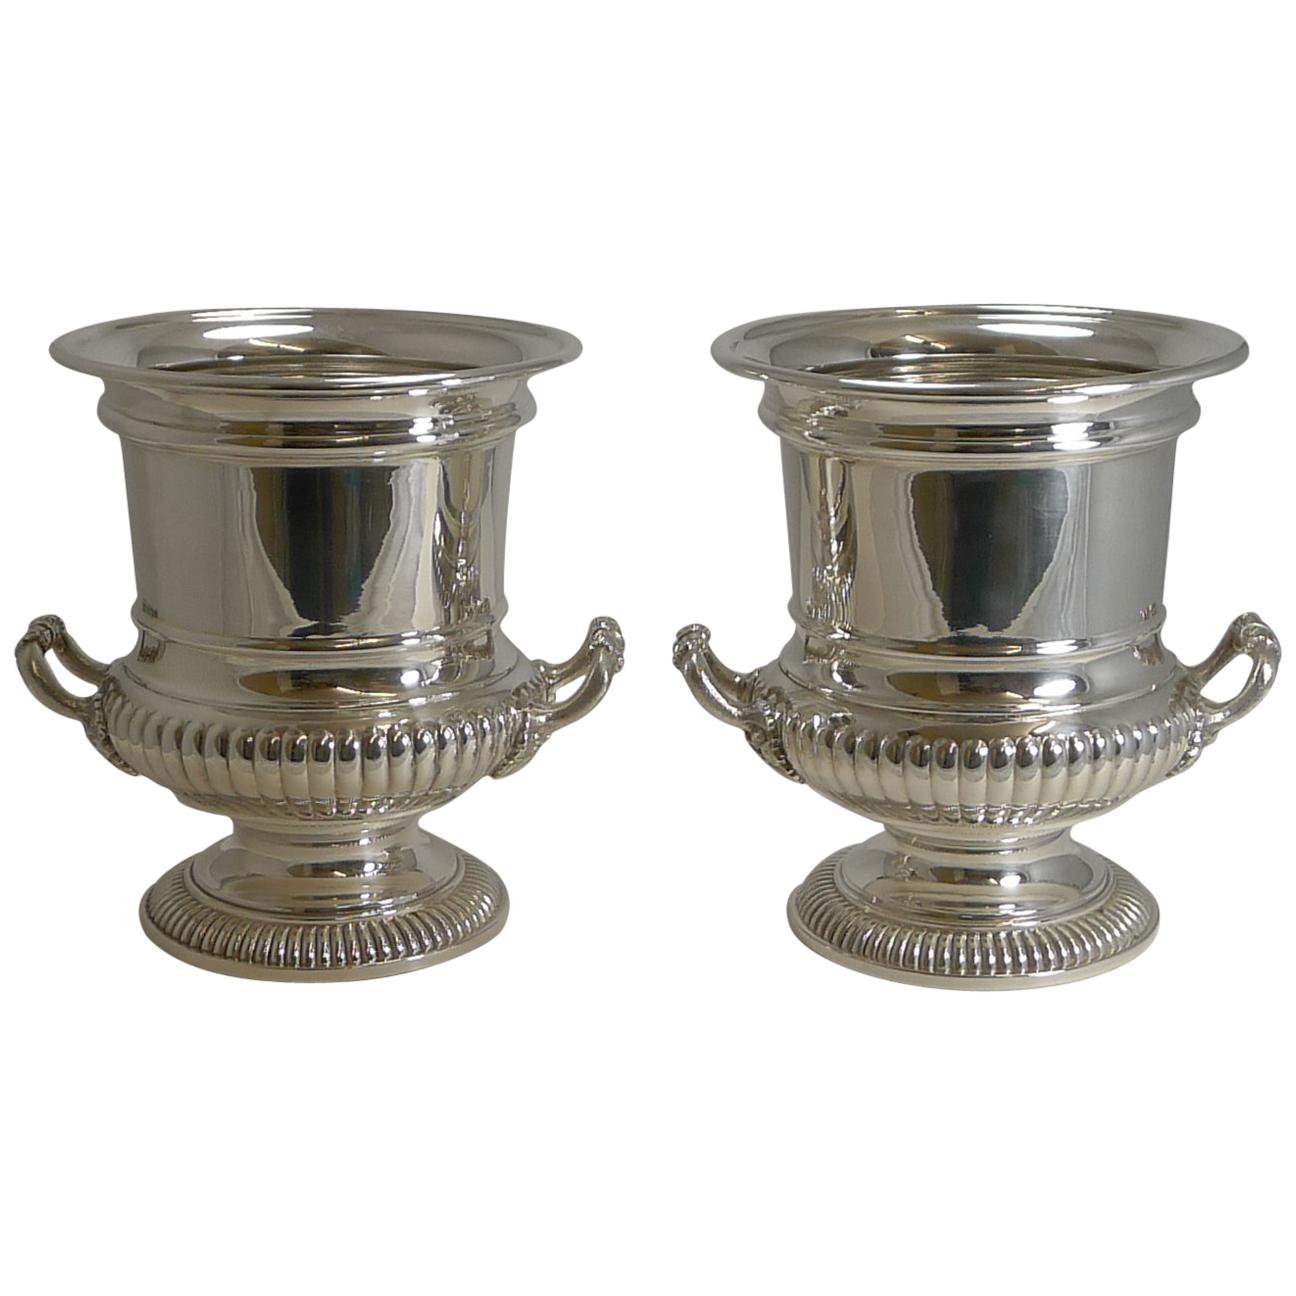 Large Pair of Antique English Silver Plated Wine / Champagne Coolers, circa 1910